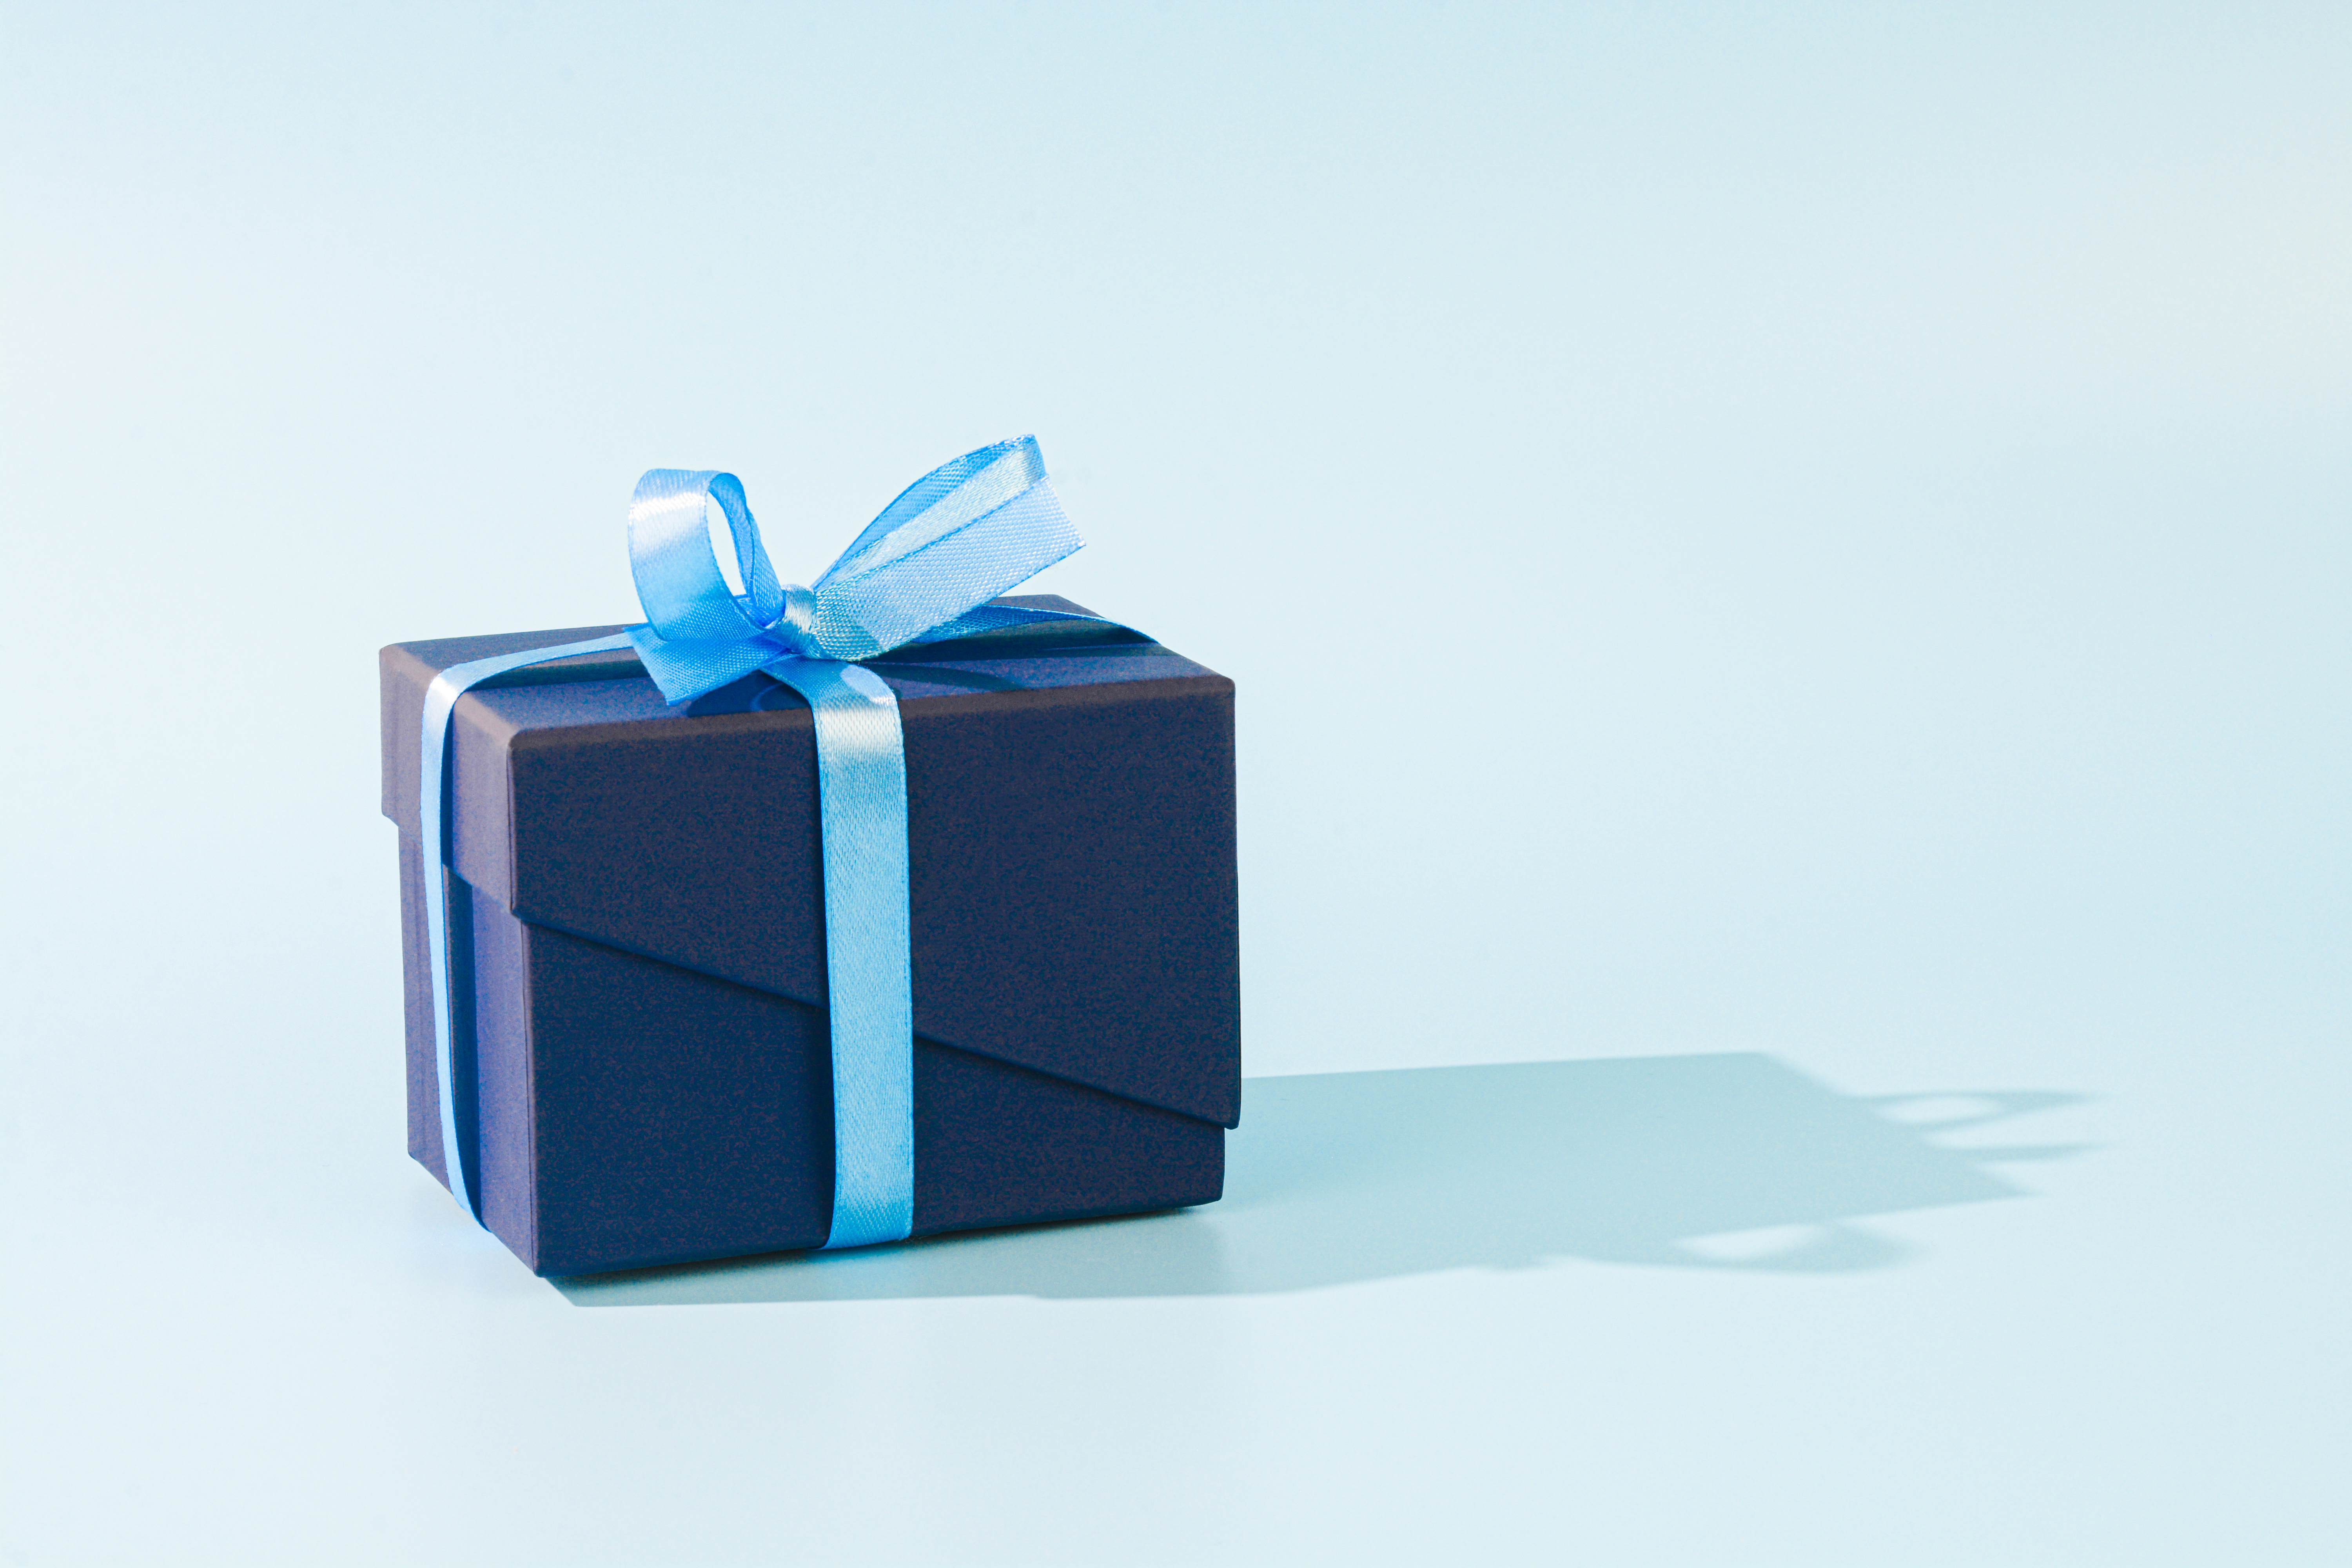 A gift wrapped with dark blue paper and a light blue ribbon | Source: Getty Images